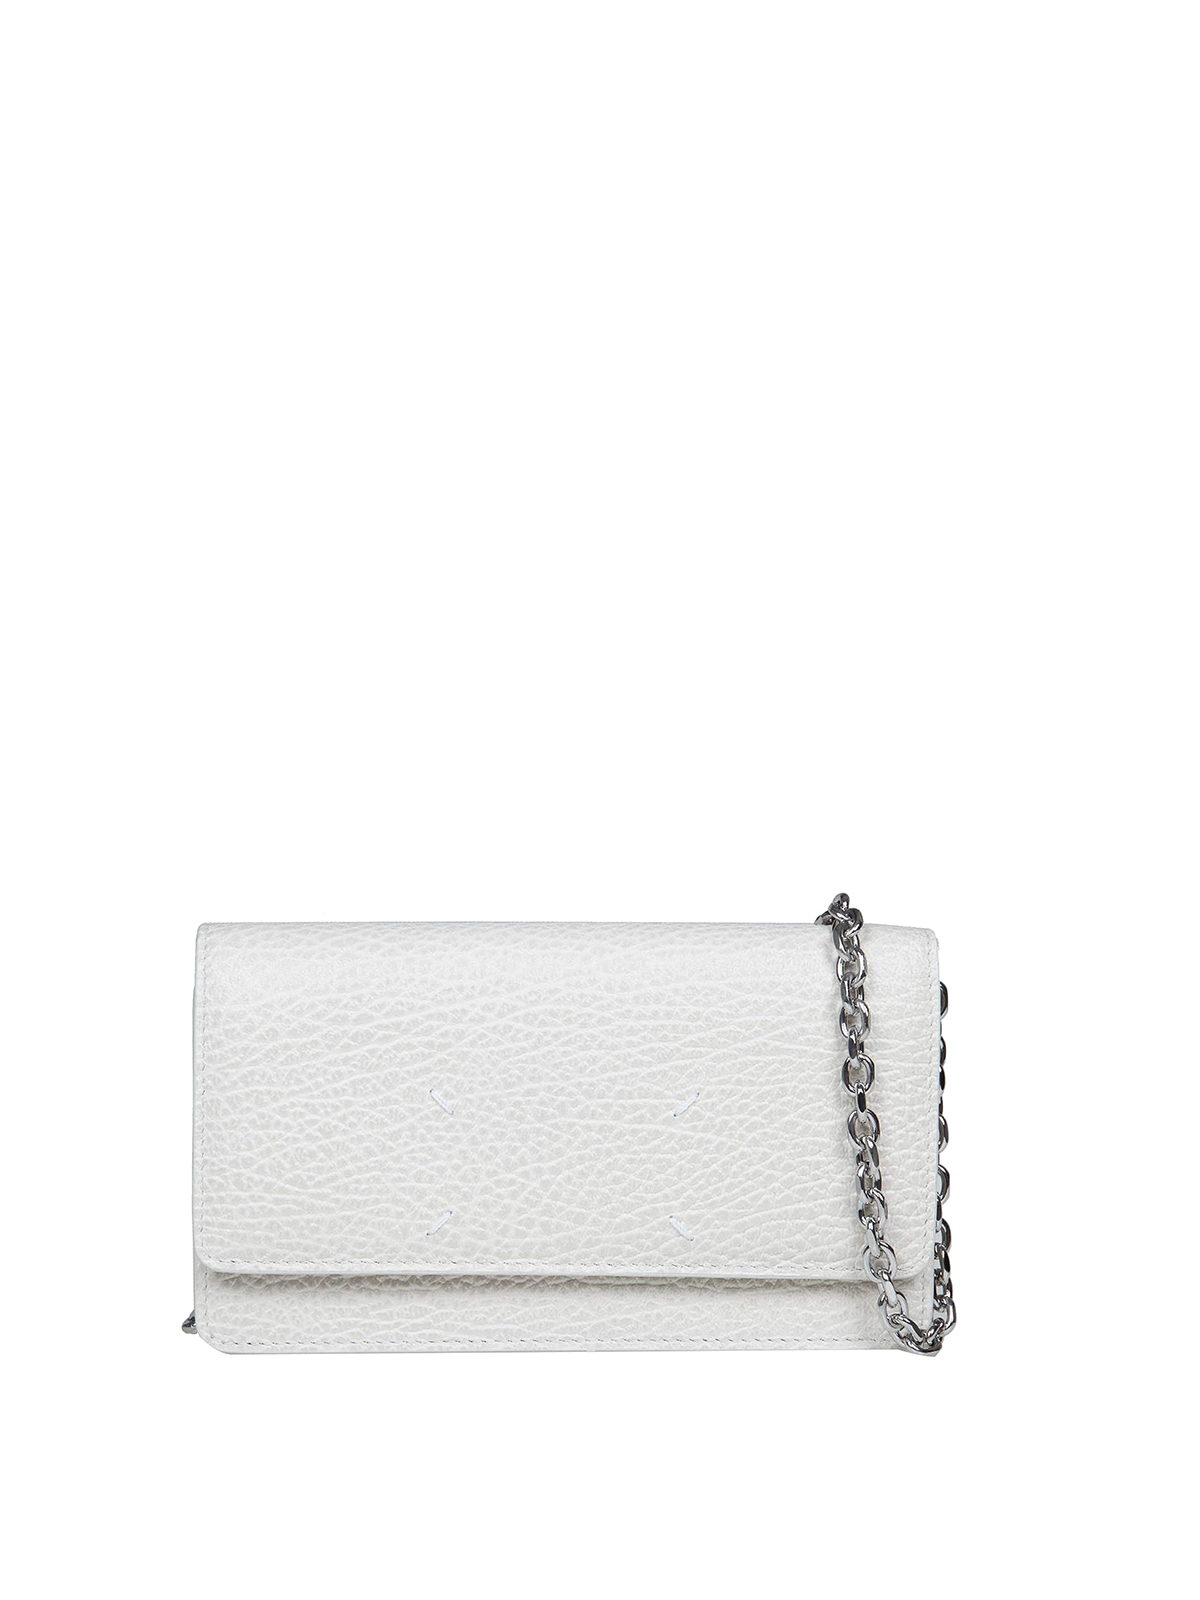 Maison Margiela Mini Chain Leather Bag With Shoulder Strap In White